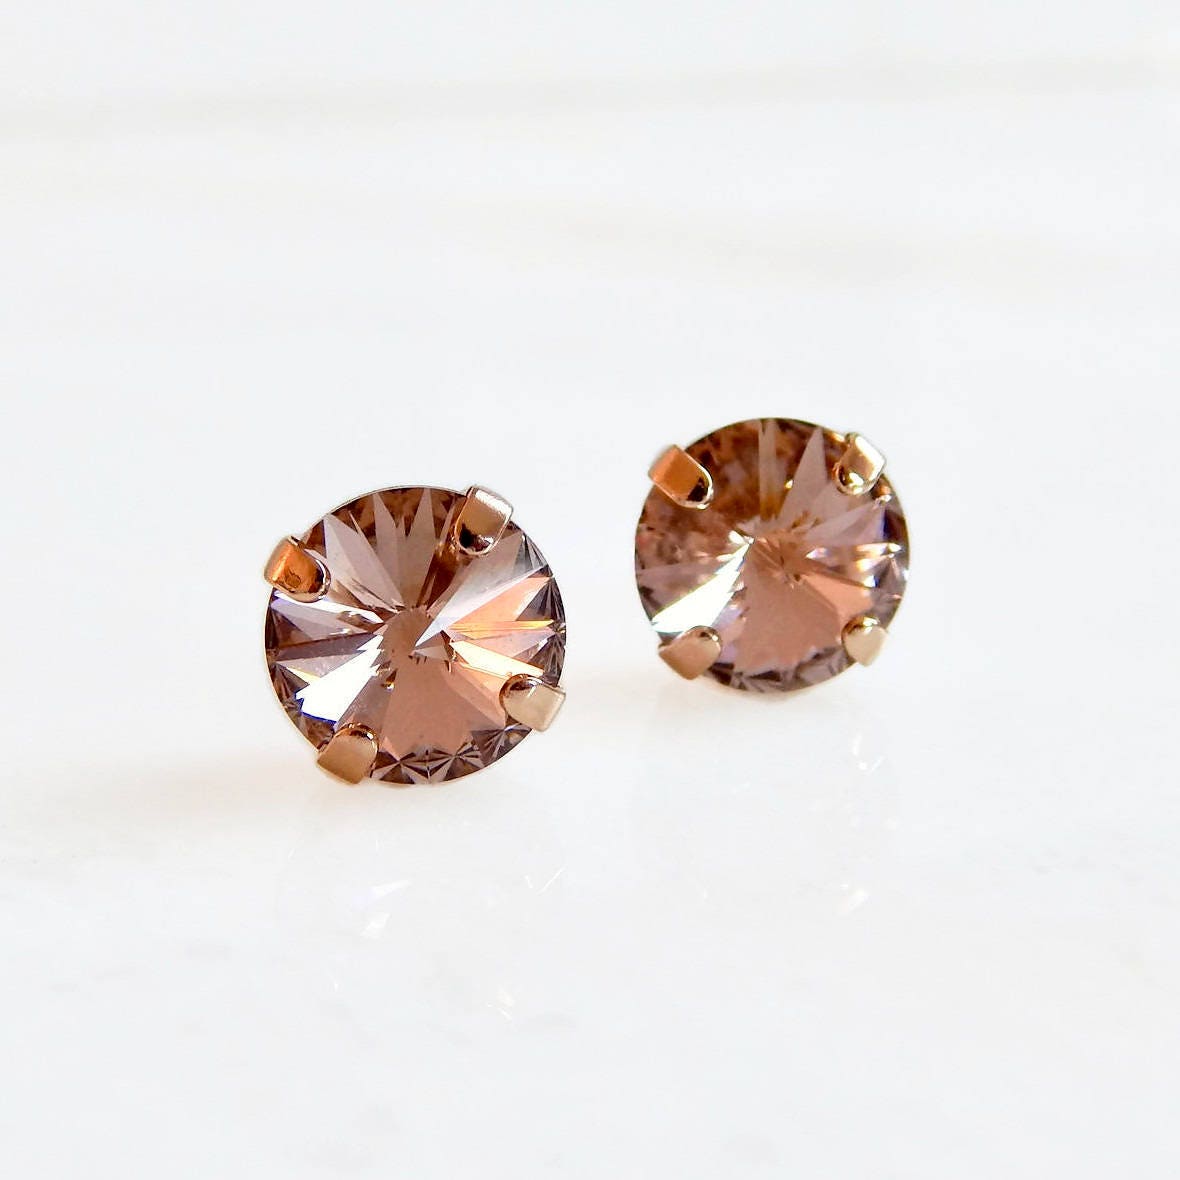 Blush and rose gold stud earrings